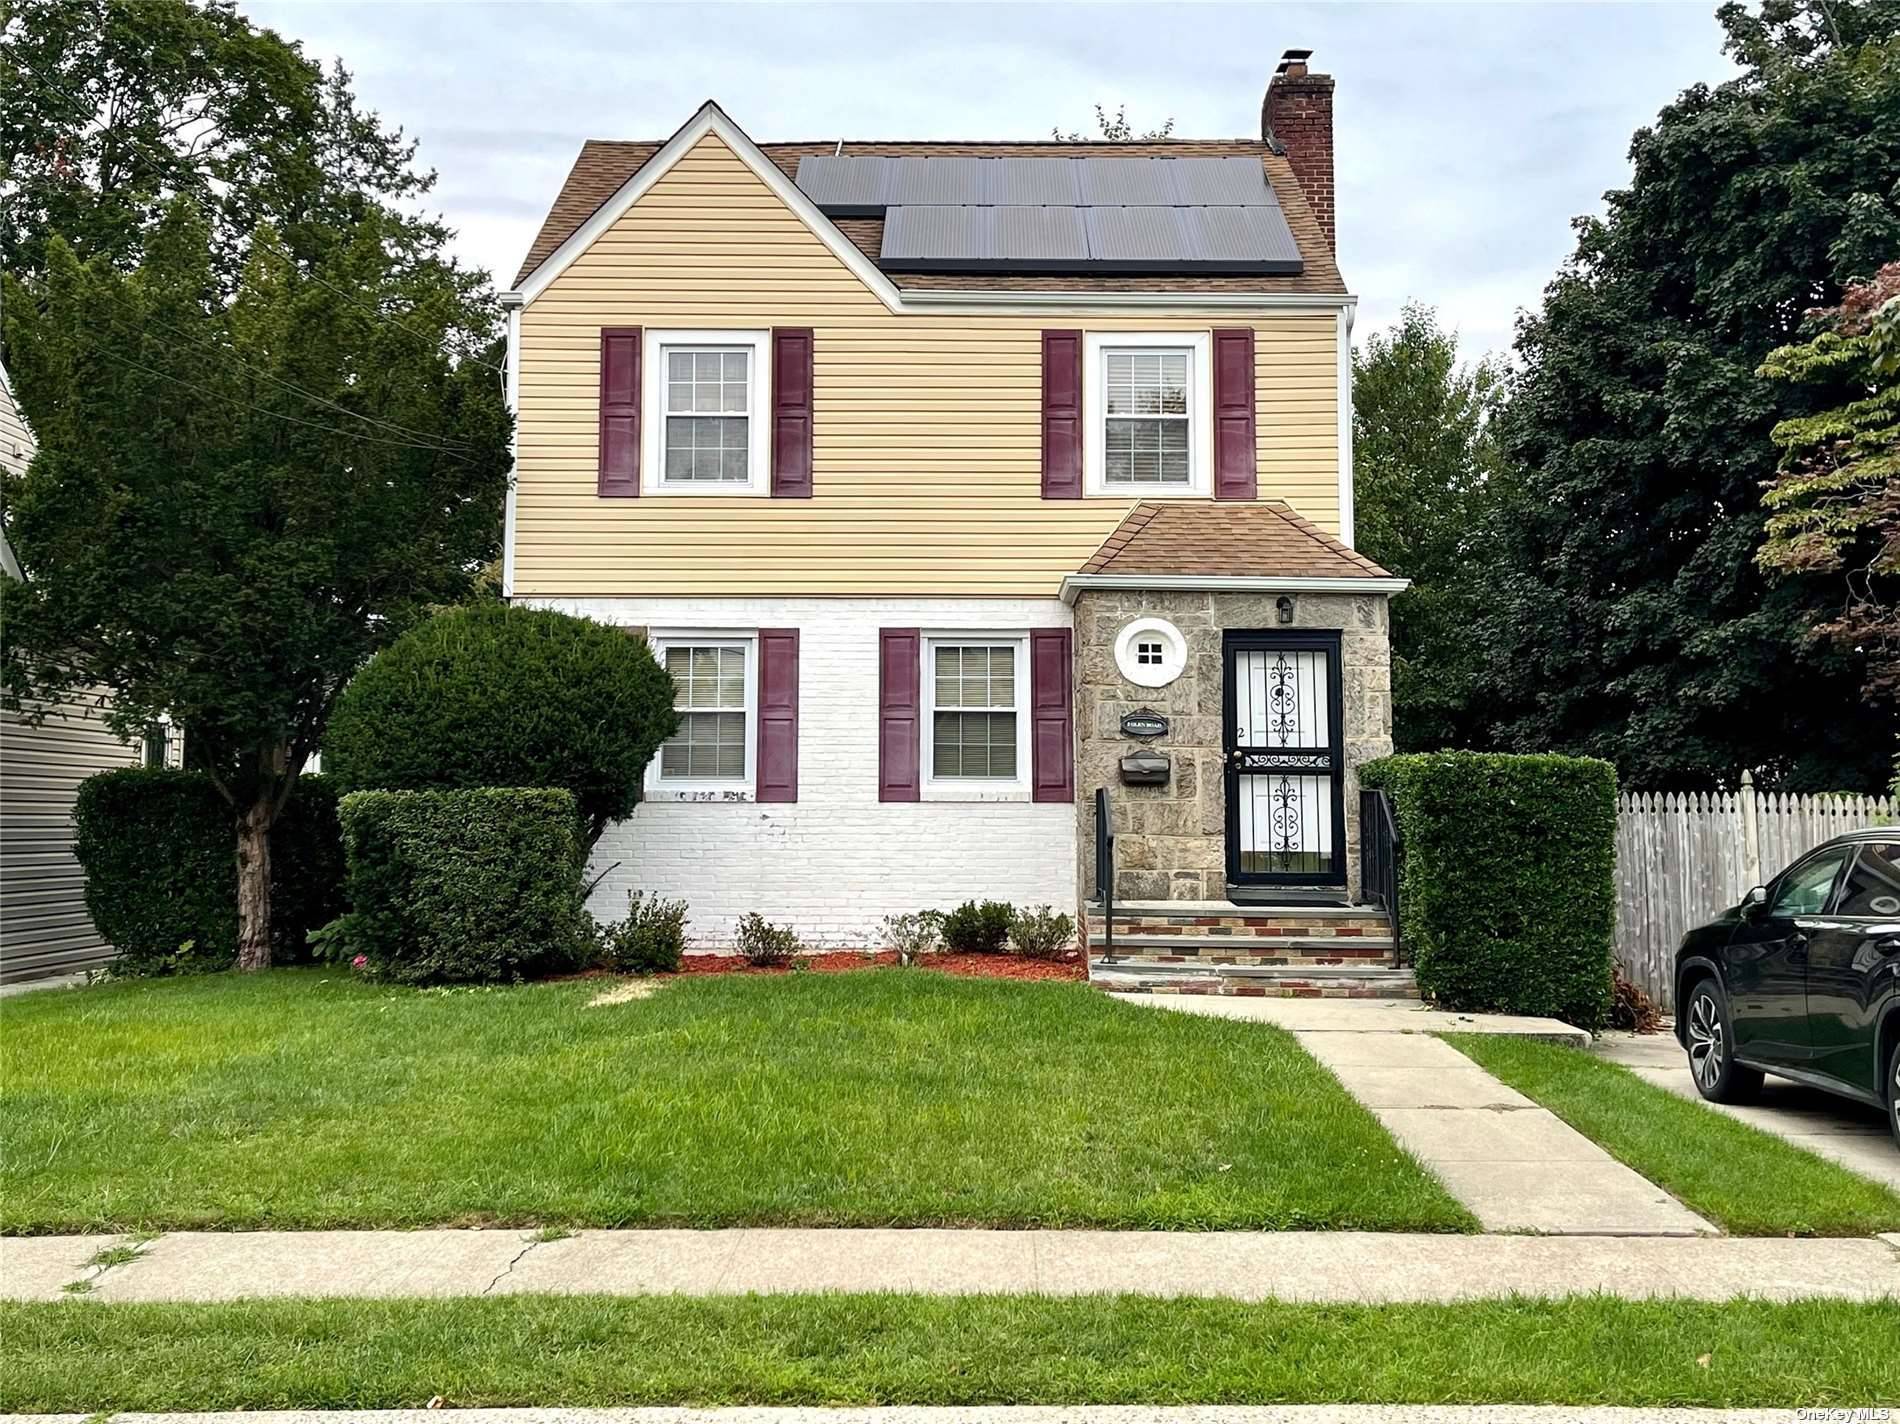 We have beautiful colonial home located on a tree lined street in West Hempstead.